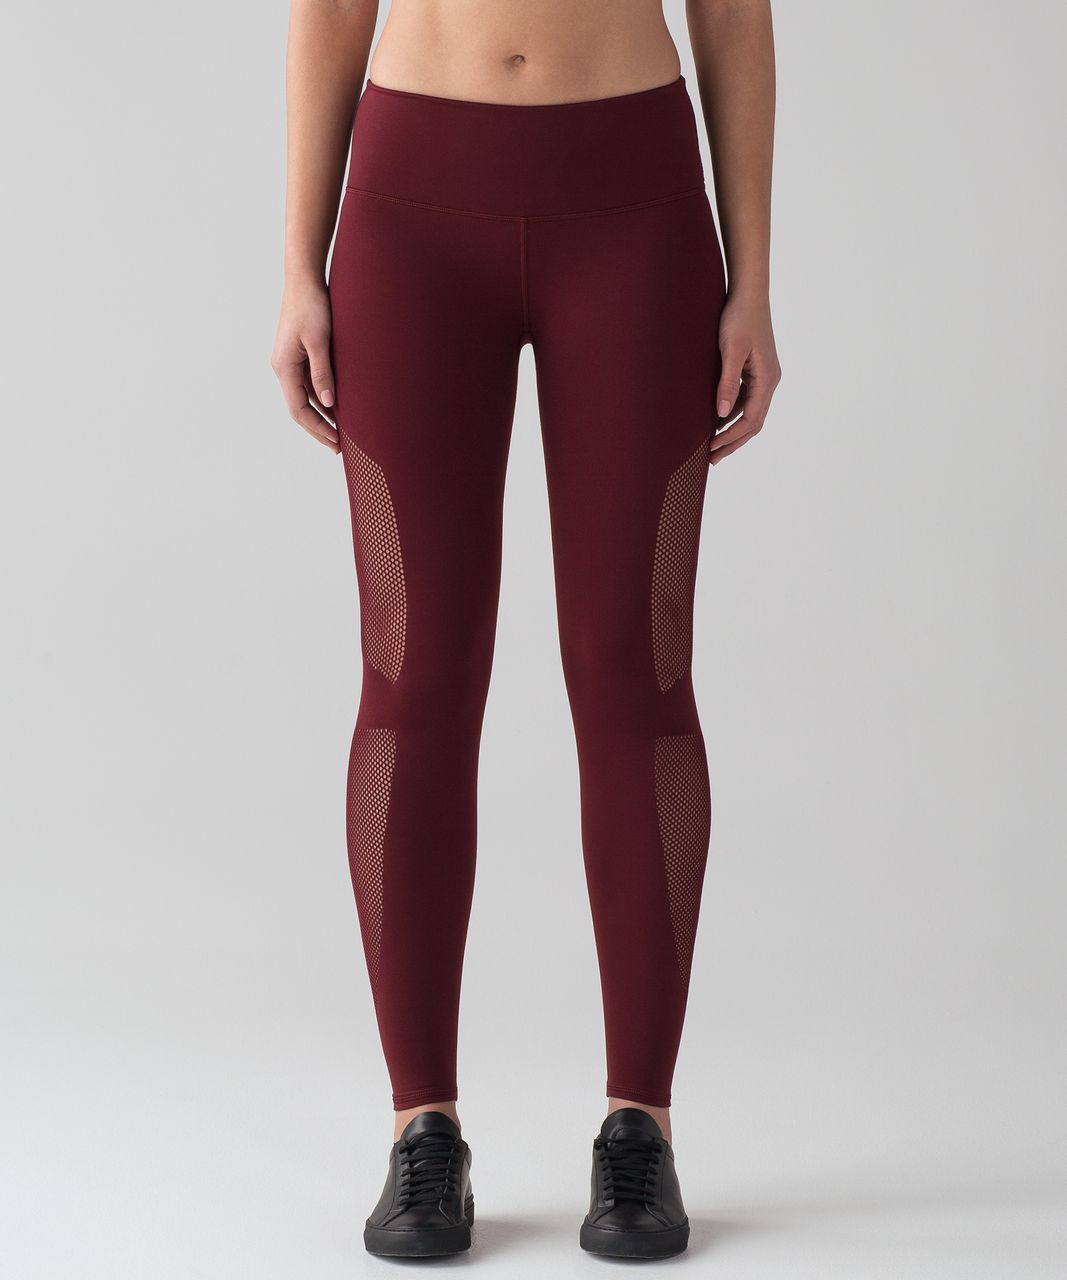 Lululemon Reveal Tight Interconnect *25.5 Ruby Red Perforated Yoga Pant 8  RARE